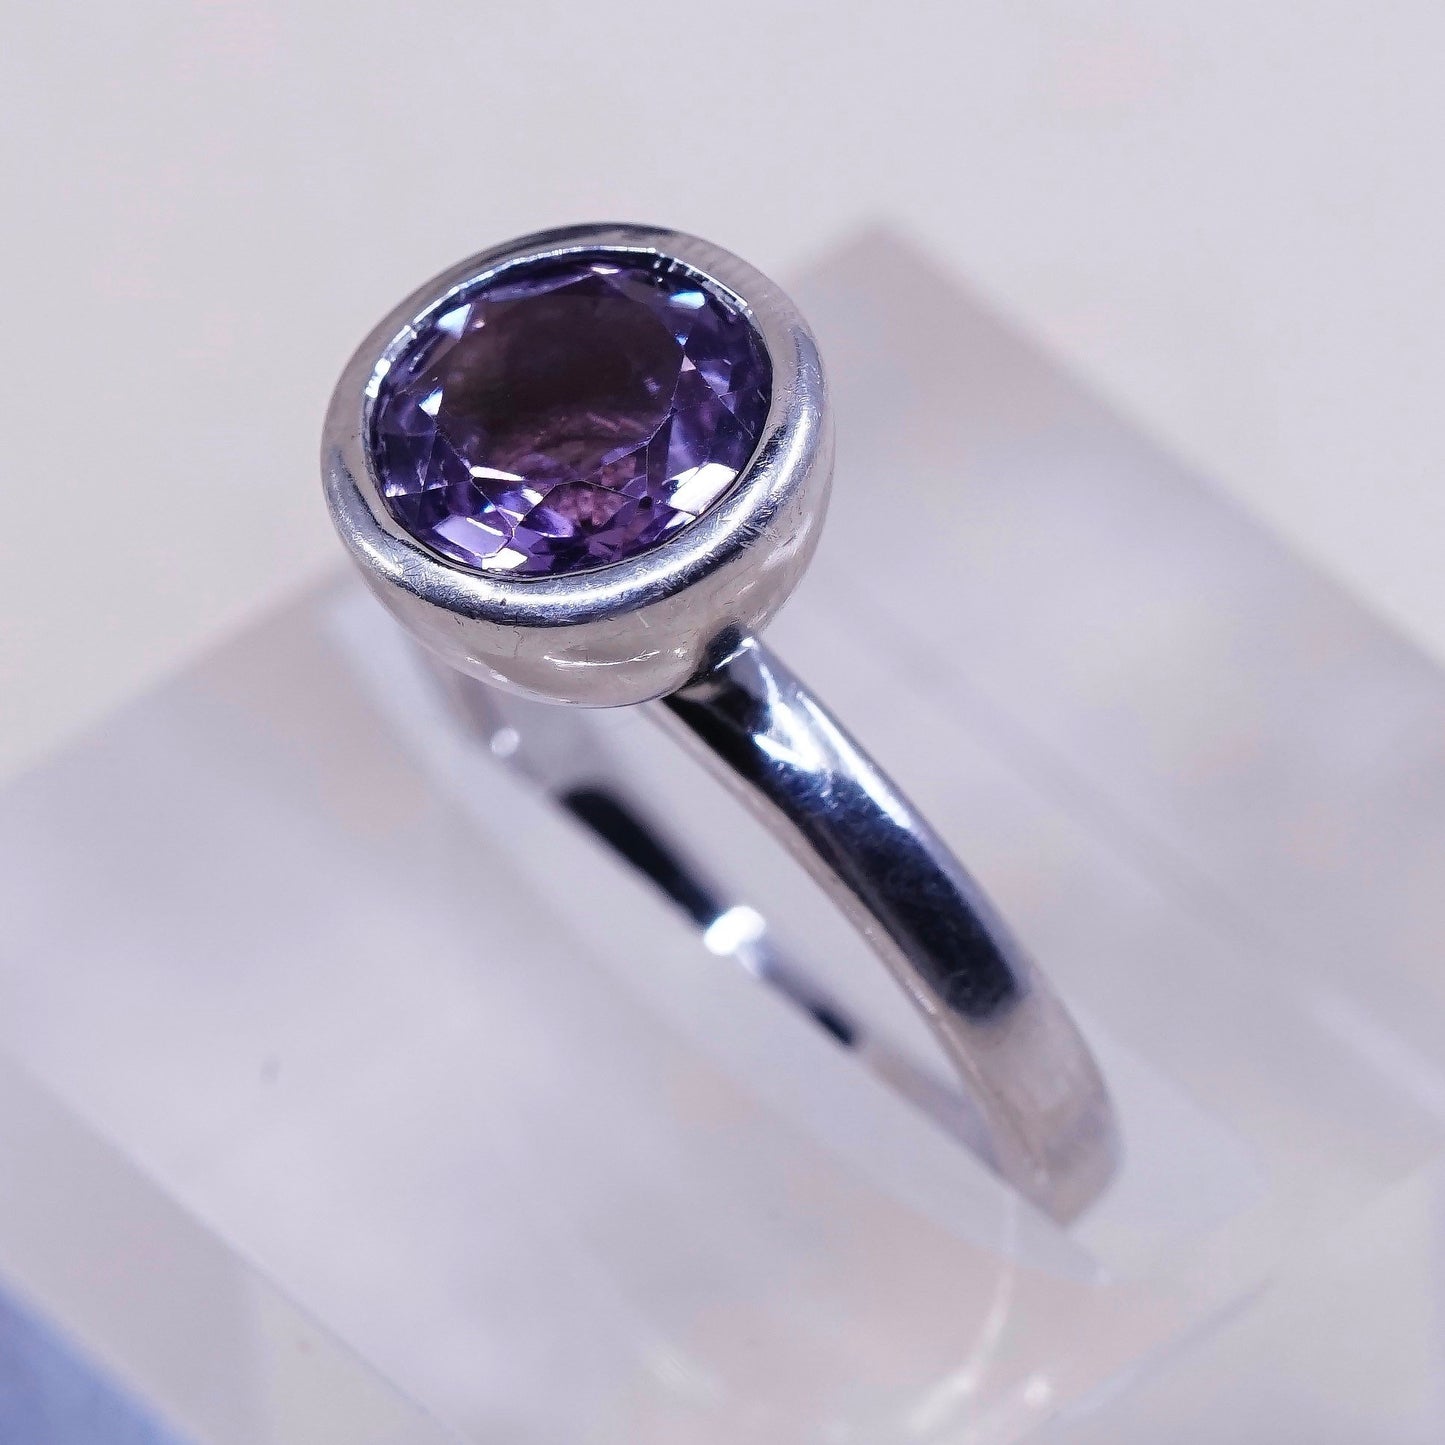 Size 7, vintage J&T Sterling silver handmade cocktail ring, 925 with amethyst